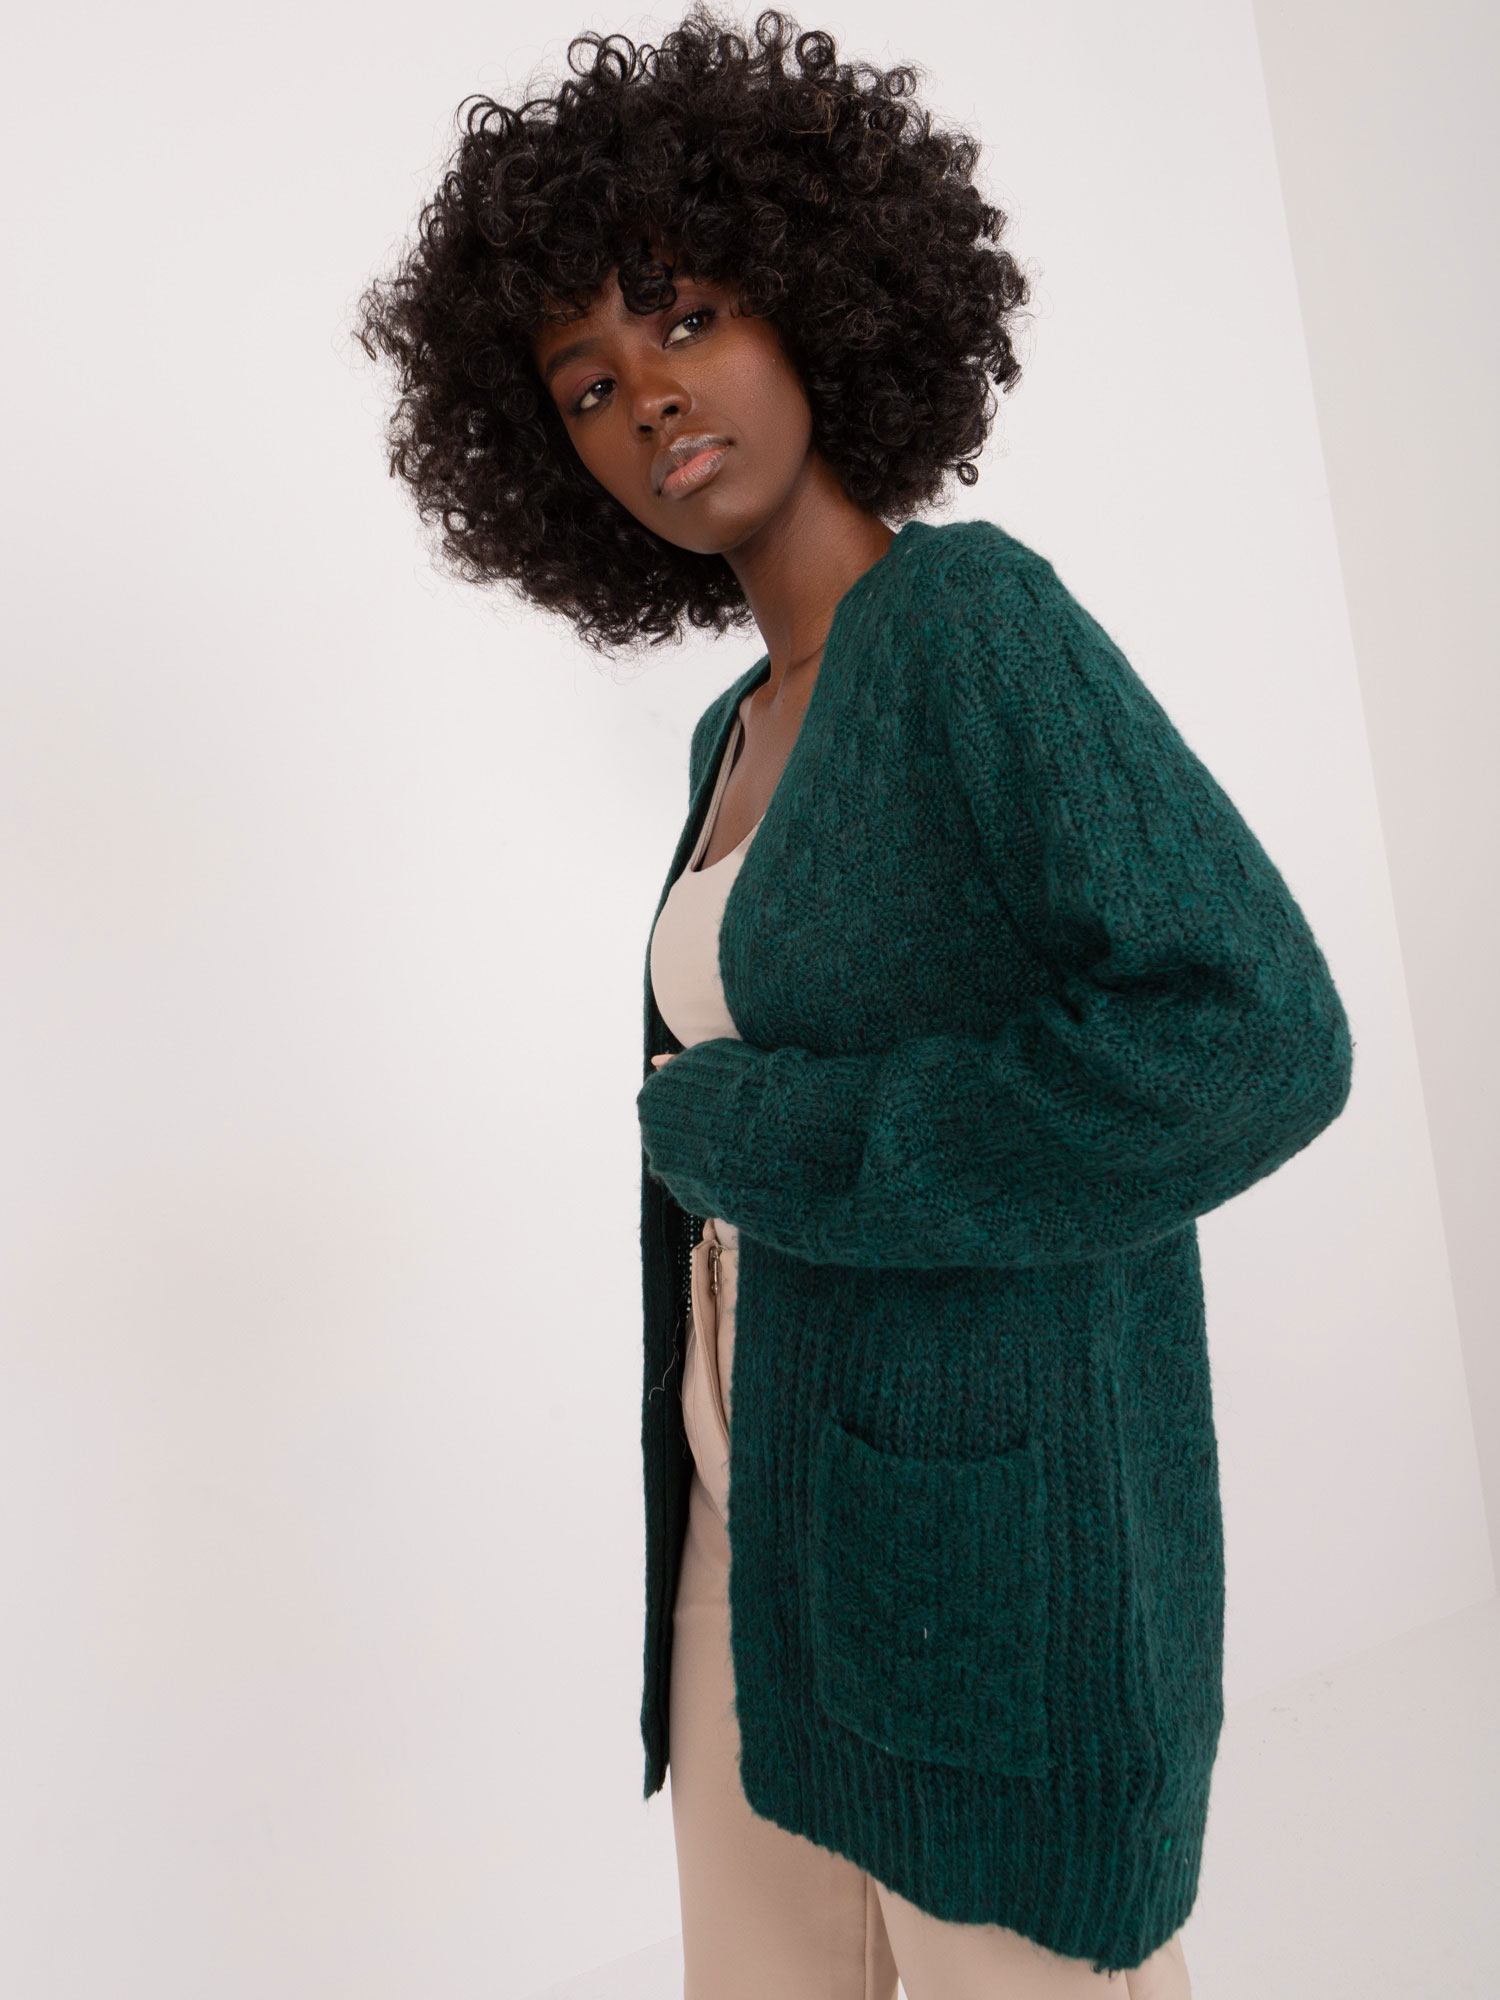 Dark green knitted cardigan without closure MYFLIES